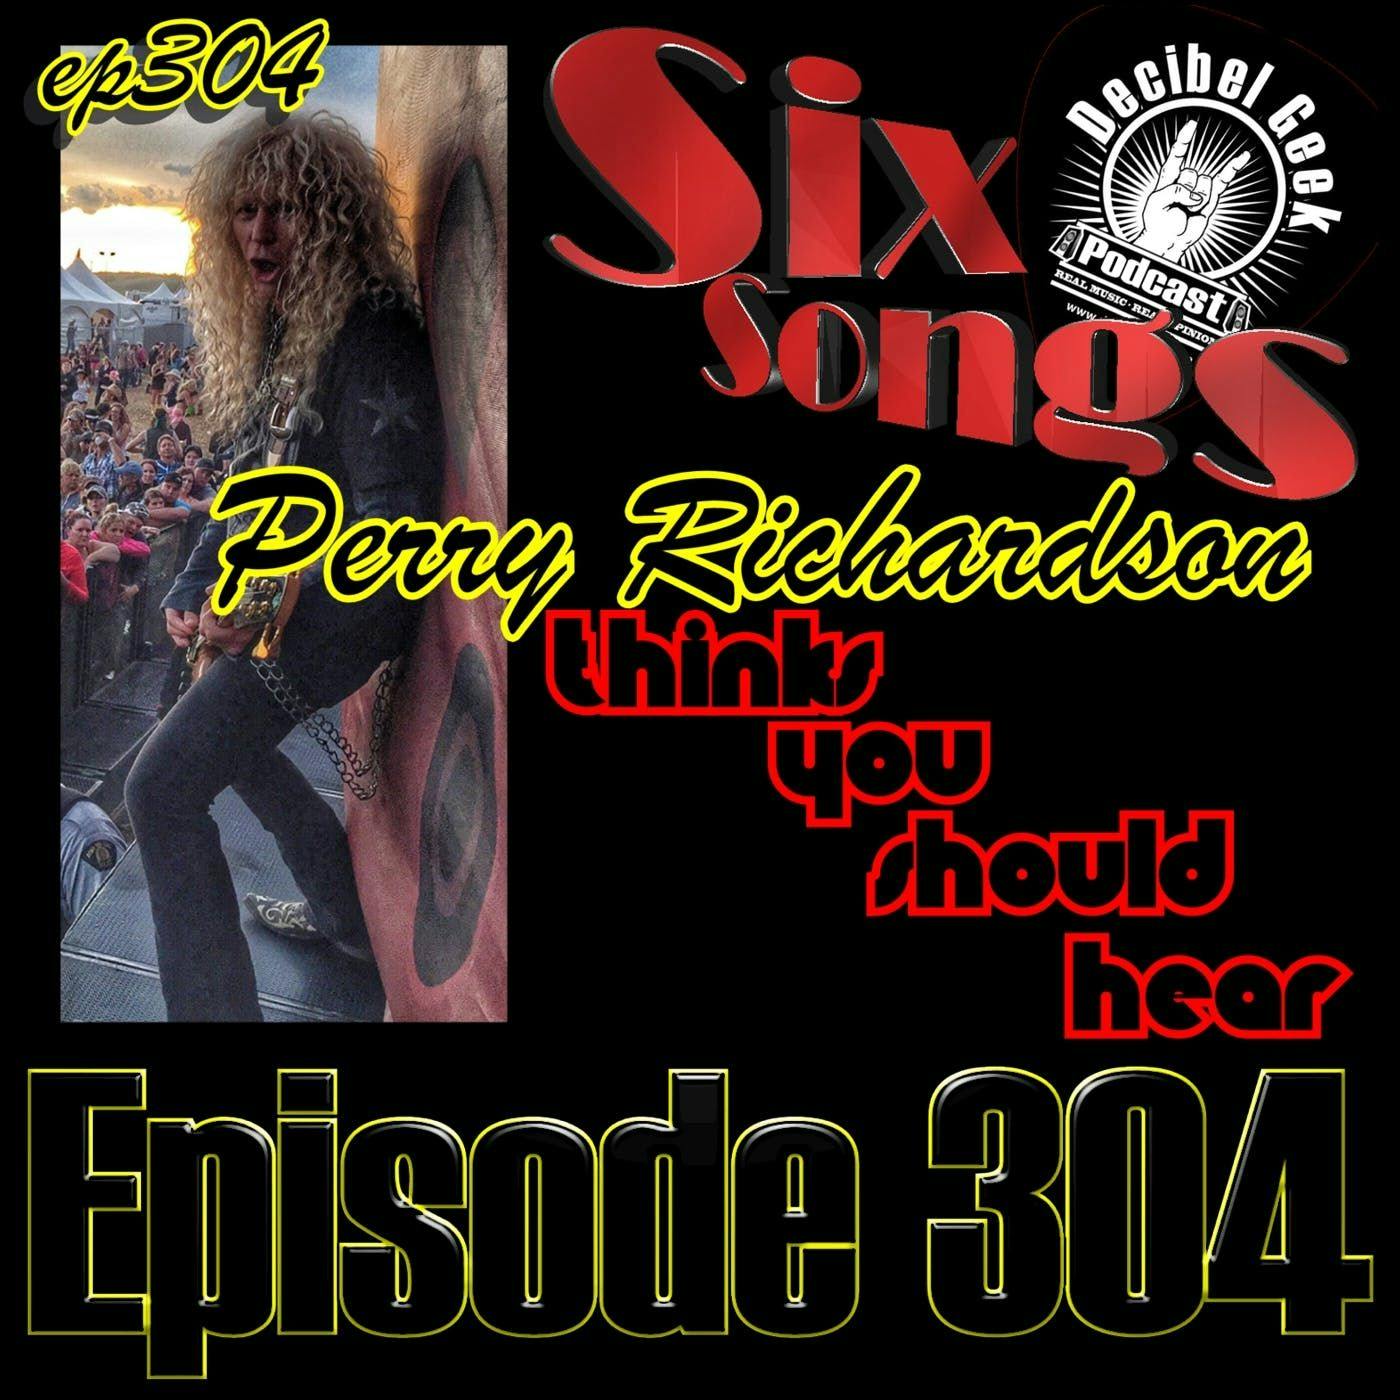 Six Songs Perry Richardson Thinks You Should Hear - Ep304